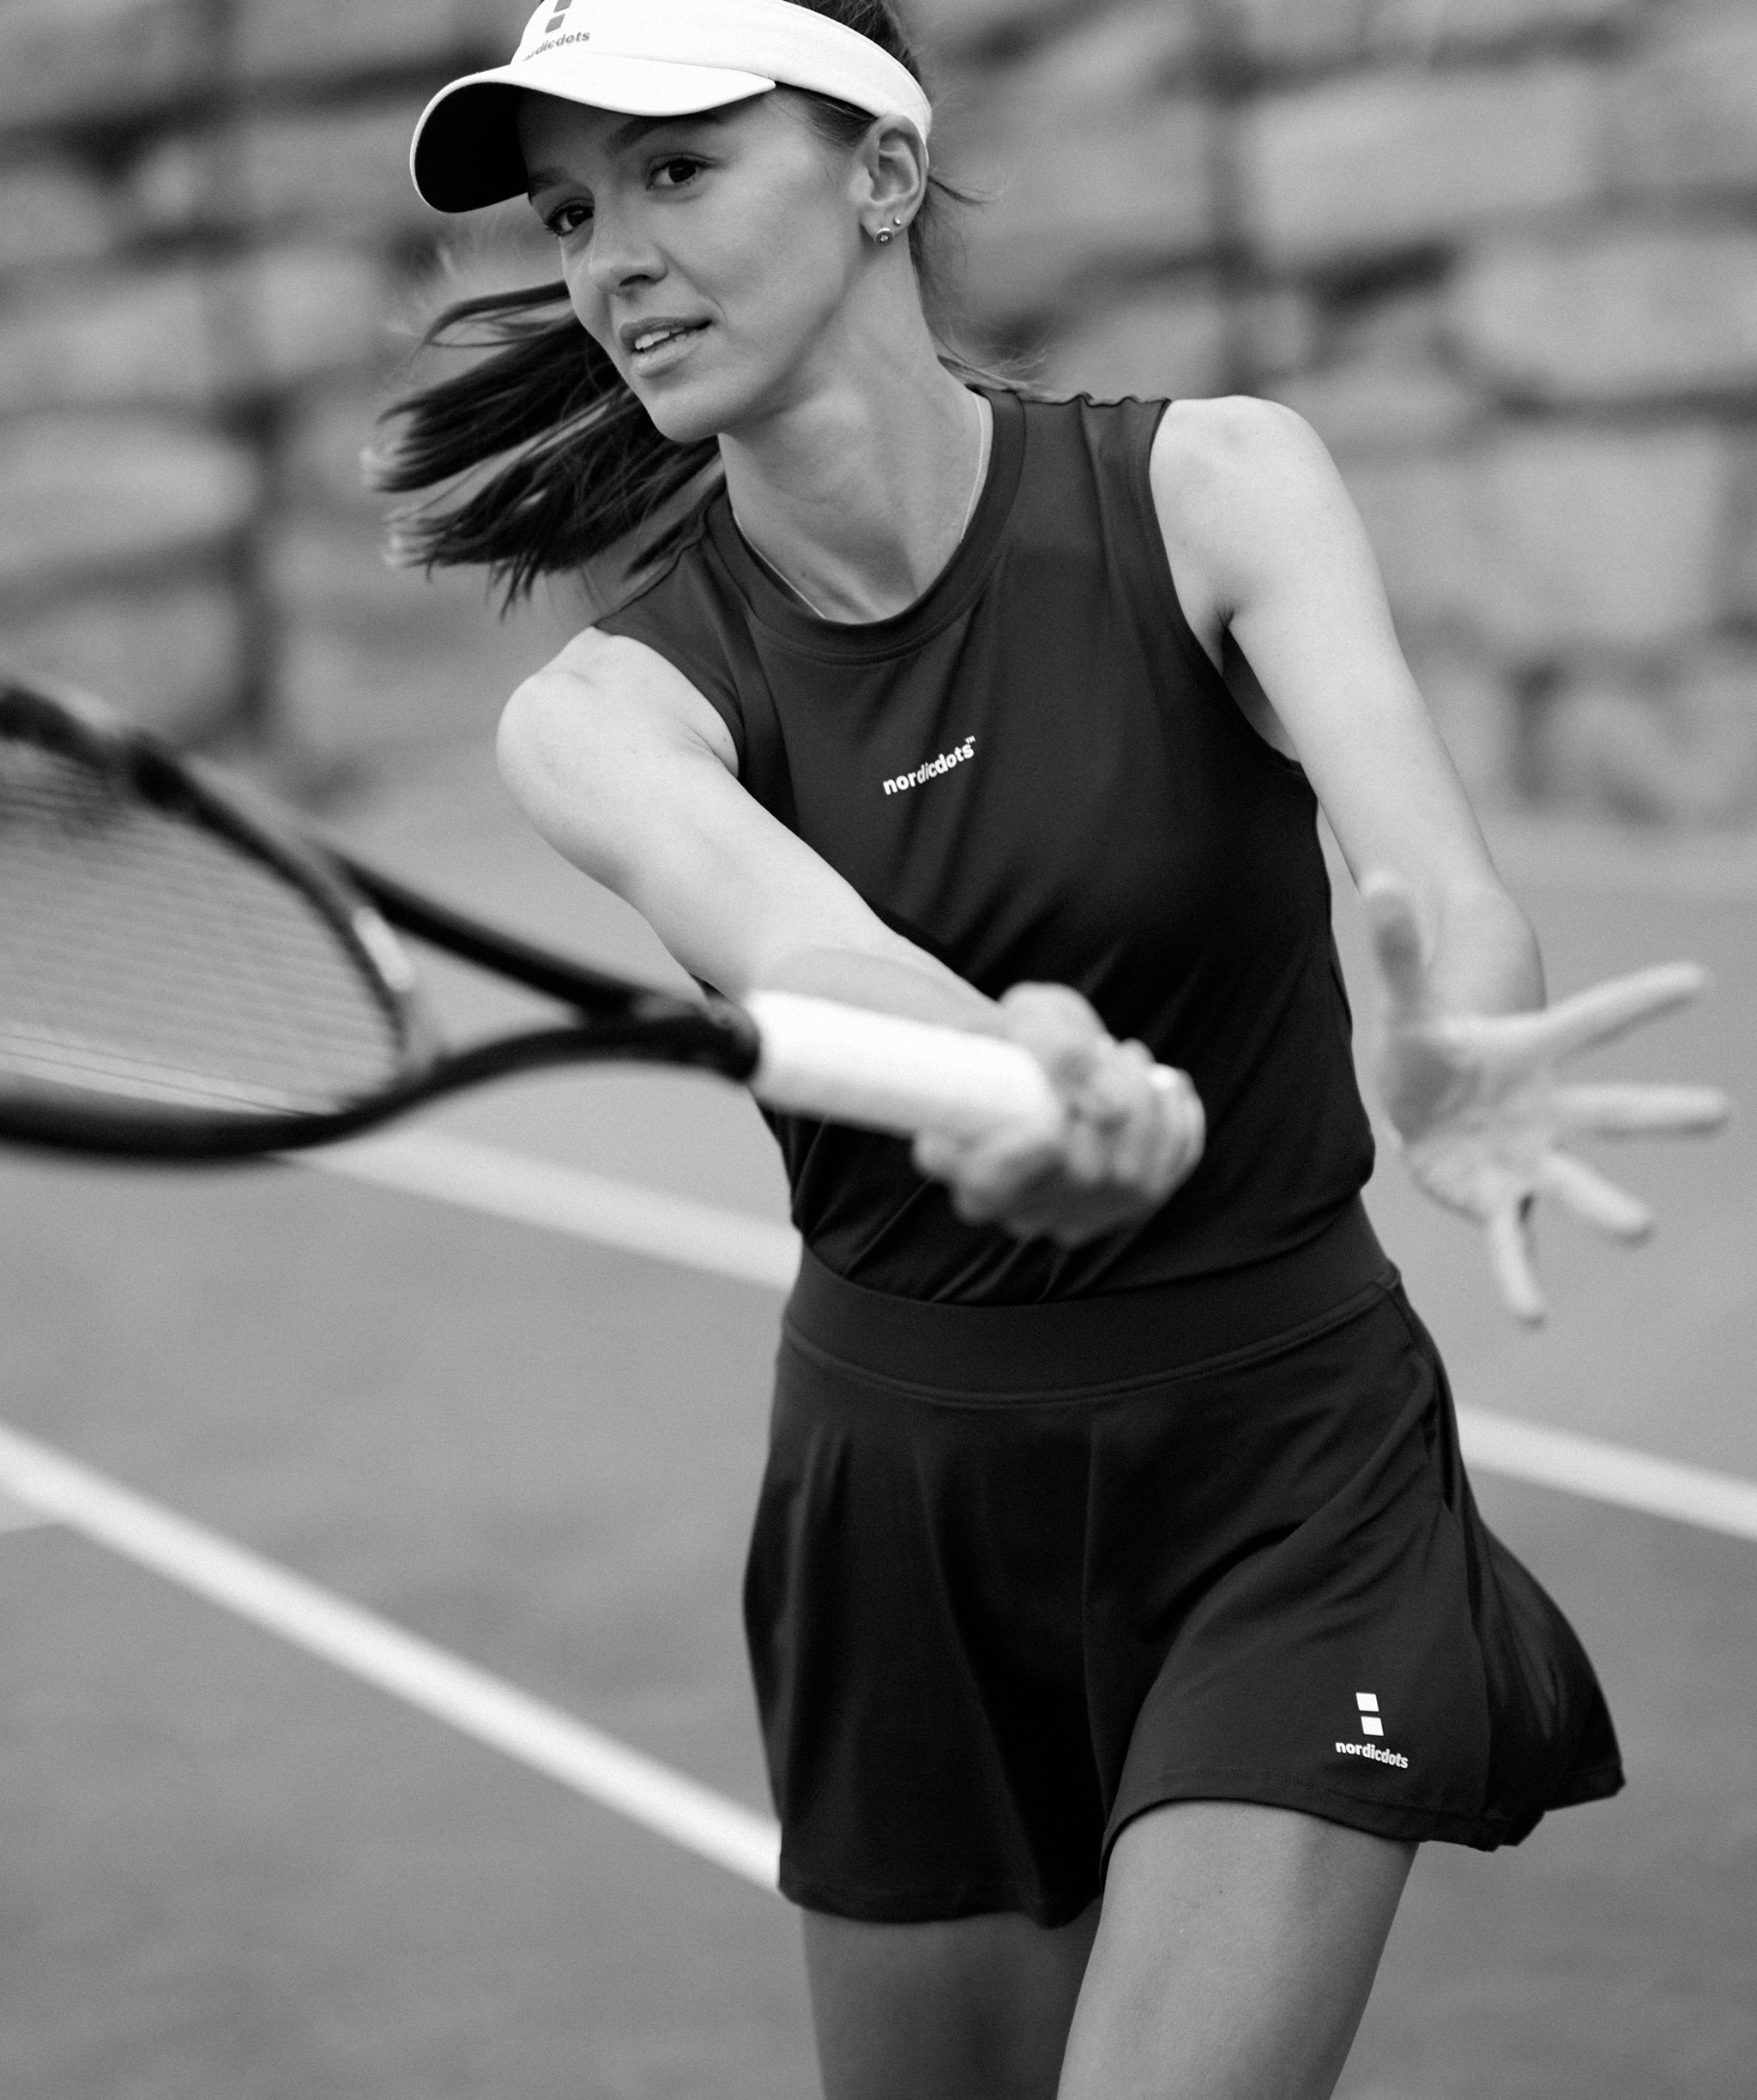 tennis player nordicdots clothing outfit apparel